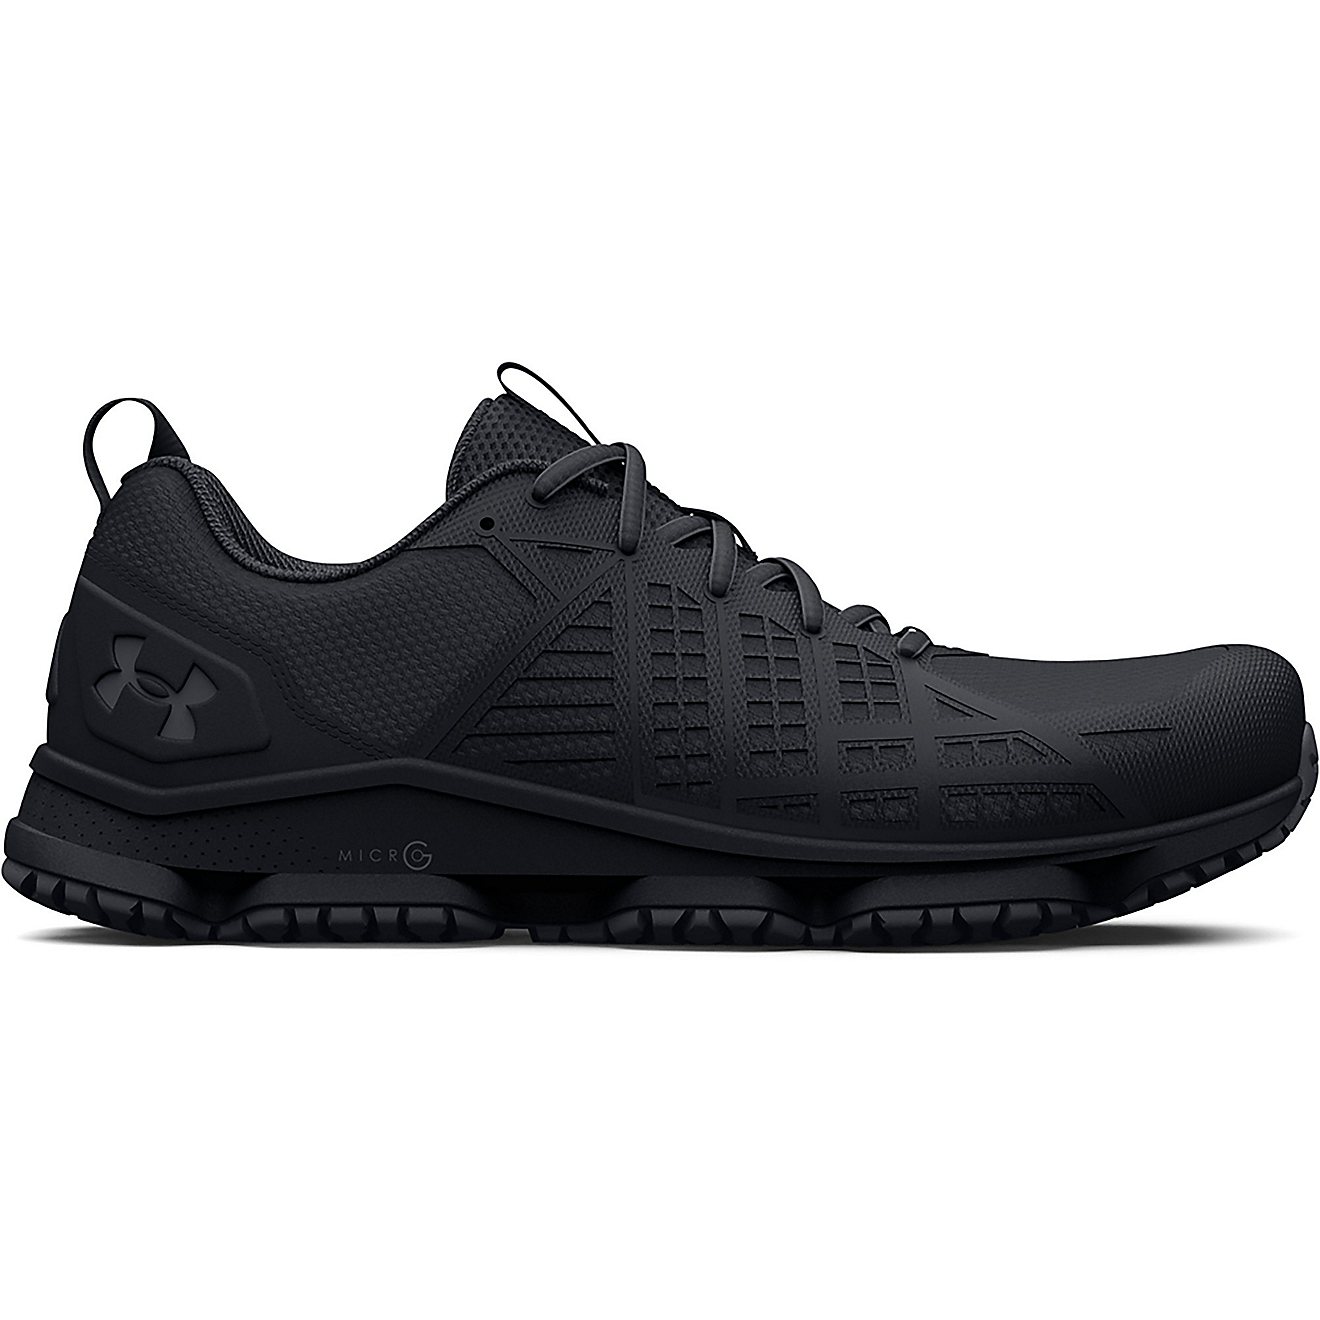 Under Armour Men's Micro G Strikefast Protect Tactical Shoes                                                                     - view number 1